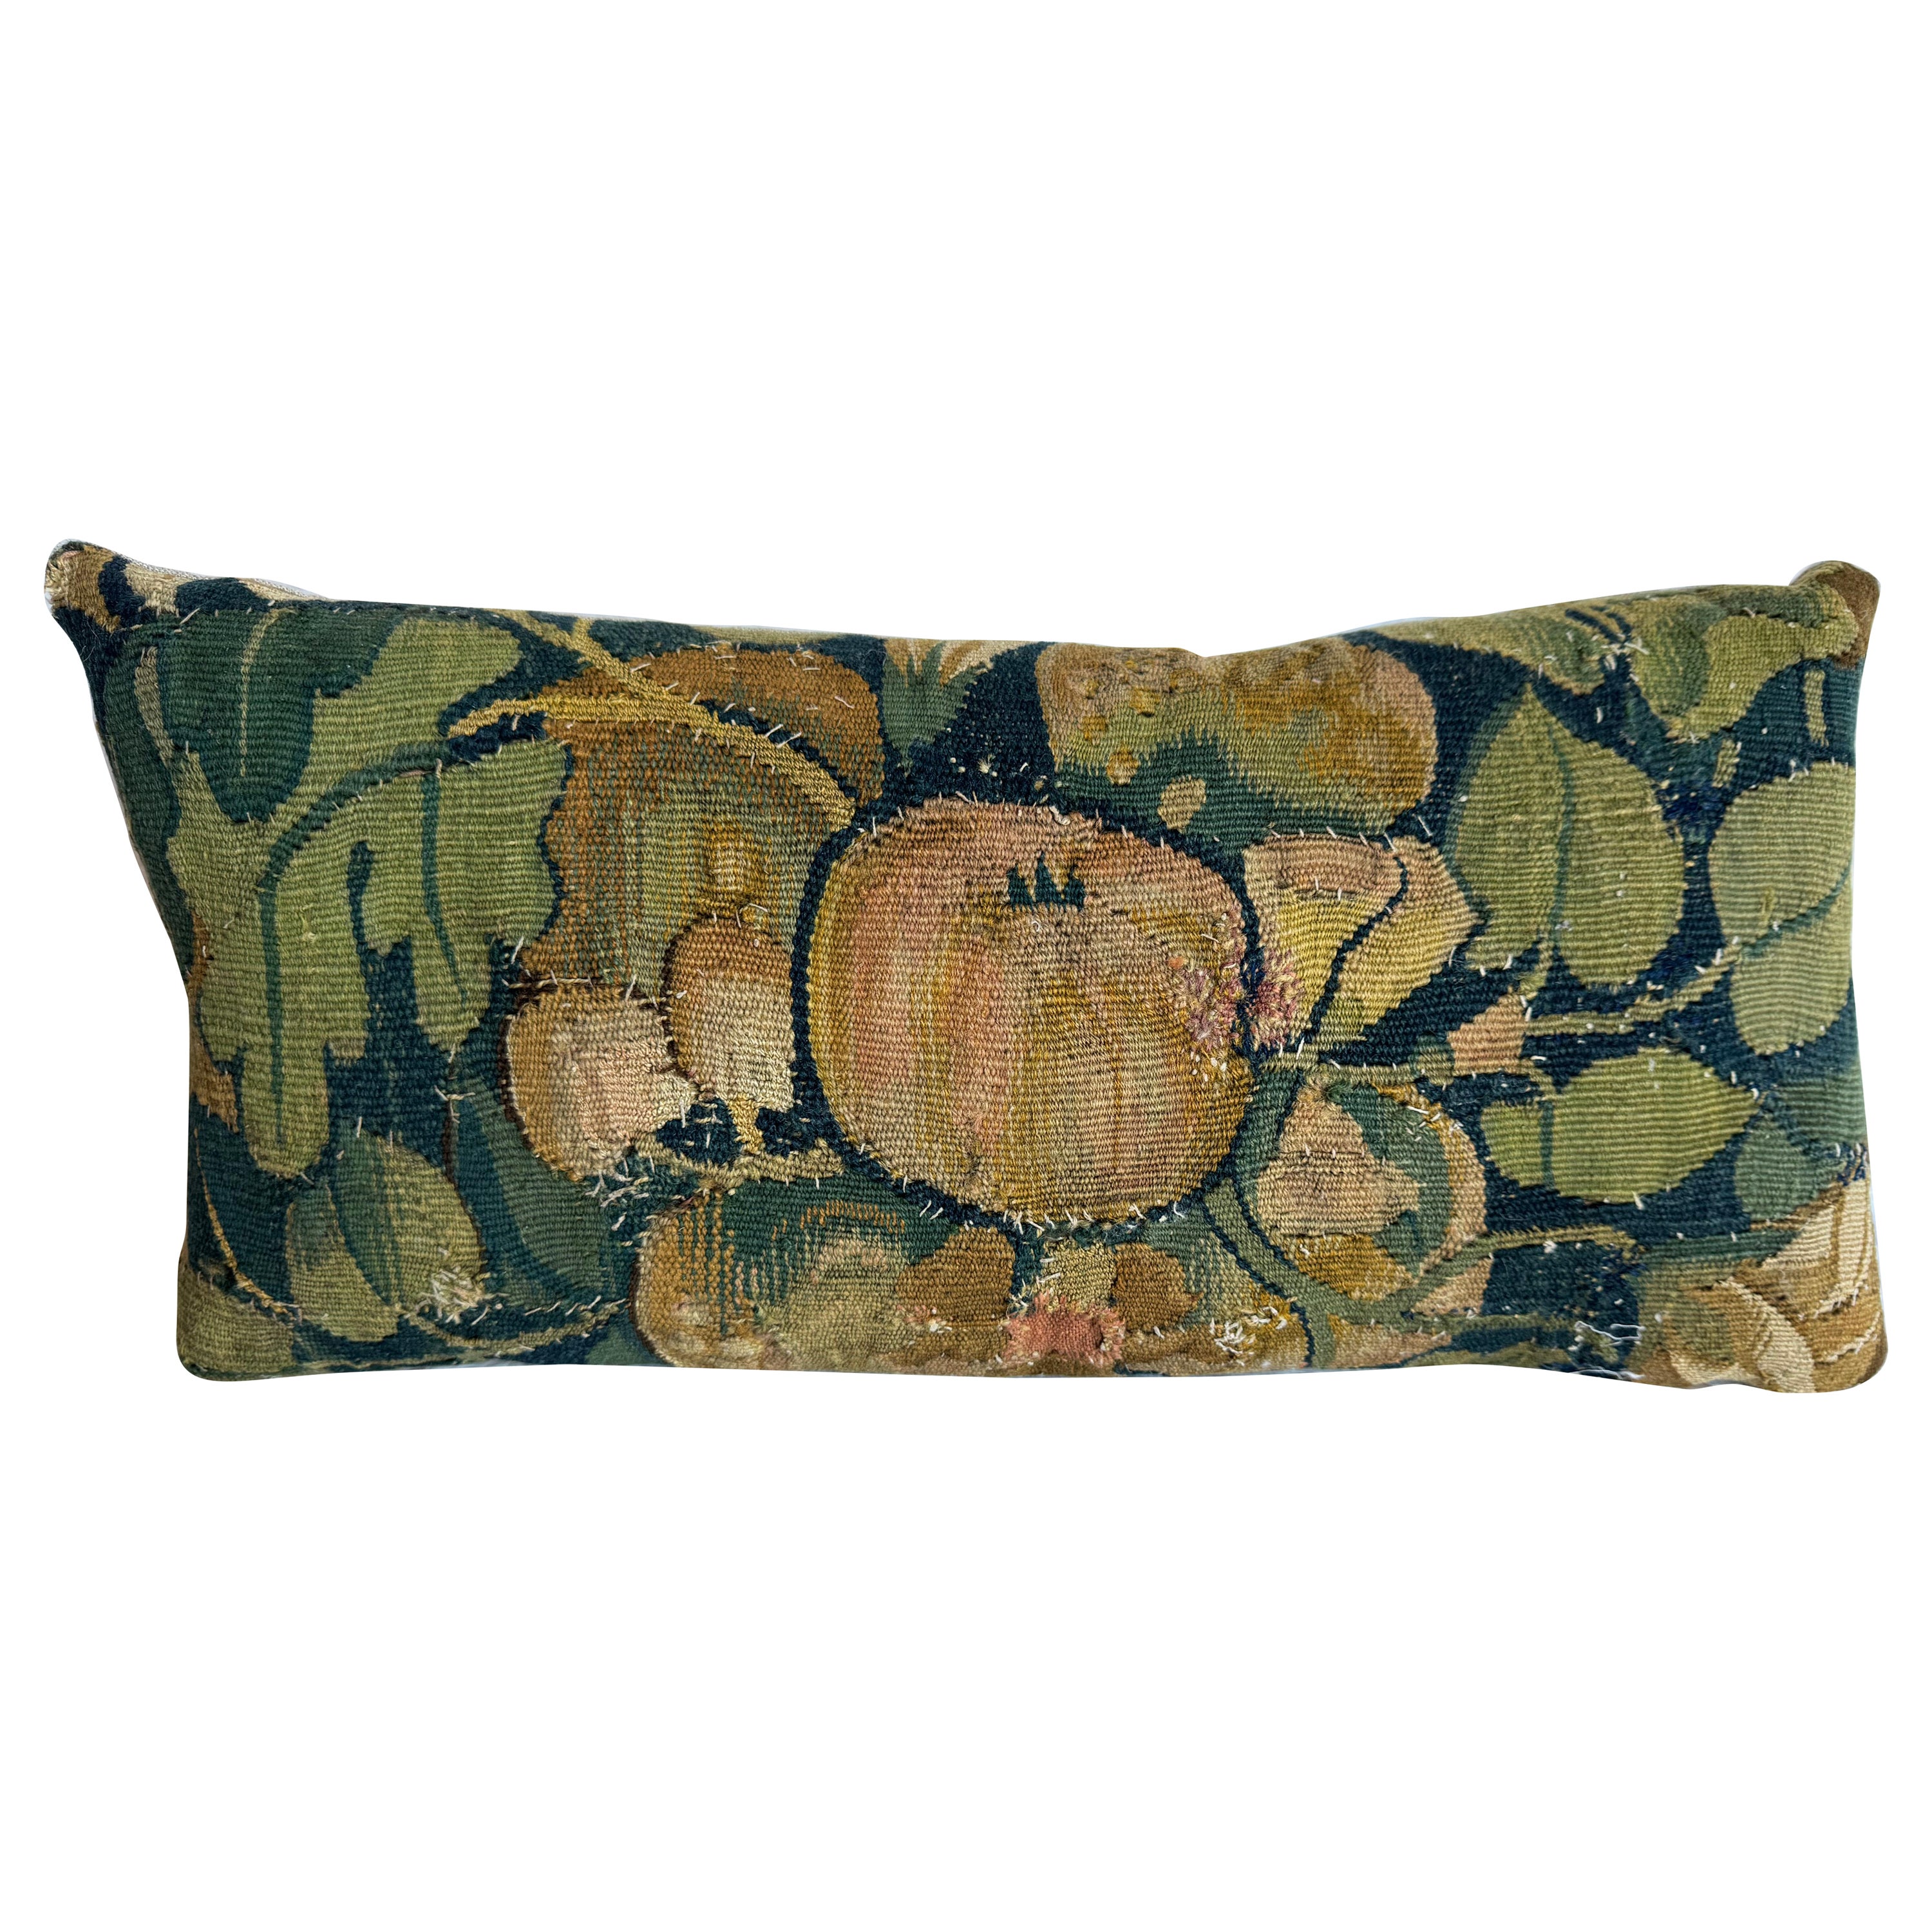  Brussels 16th Century Pillow - 20"x10"